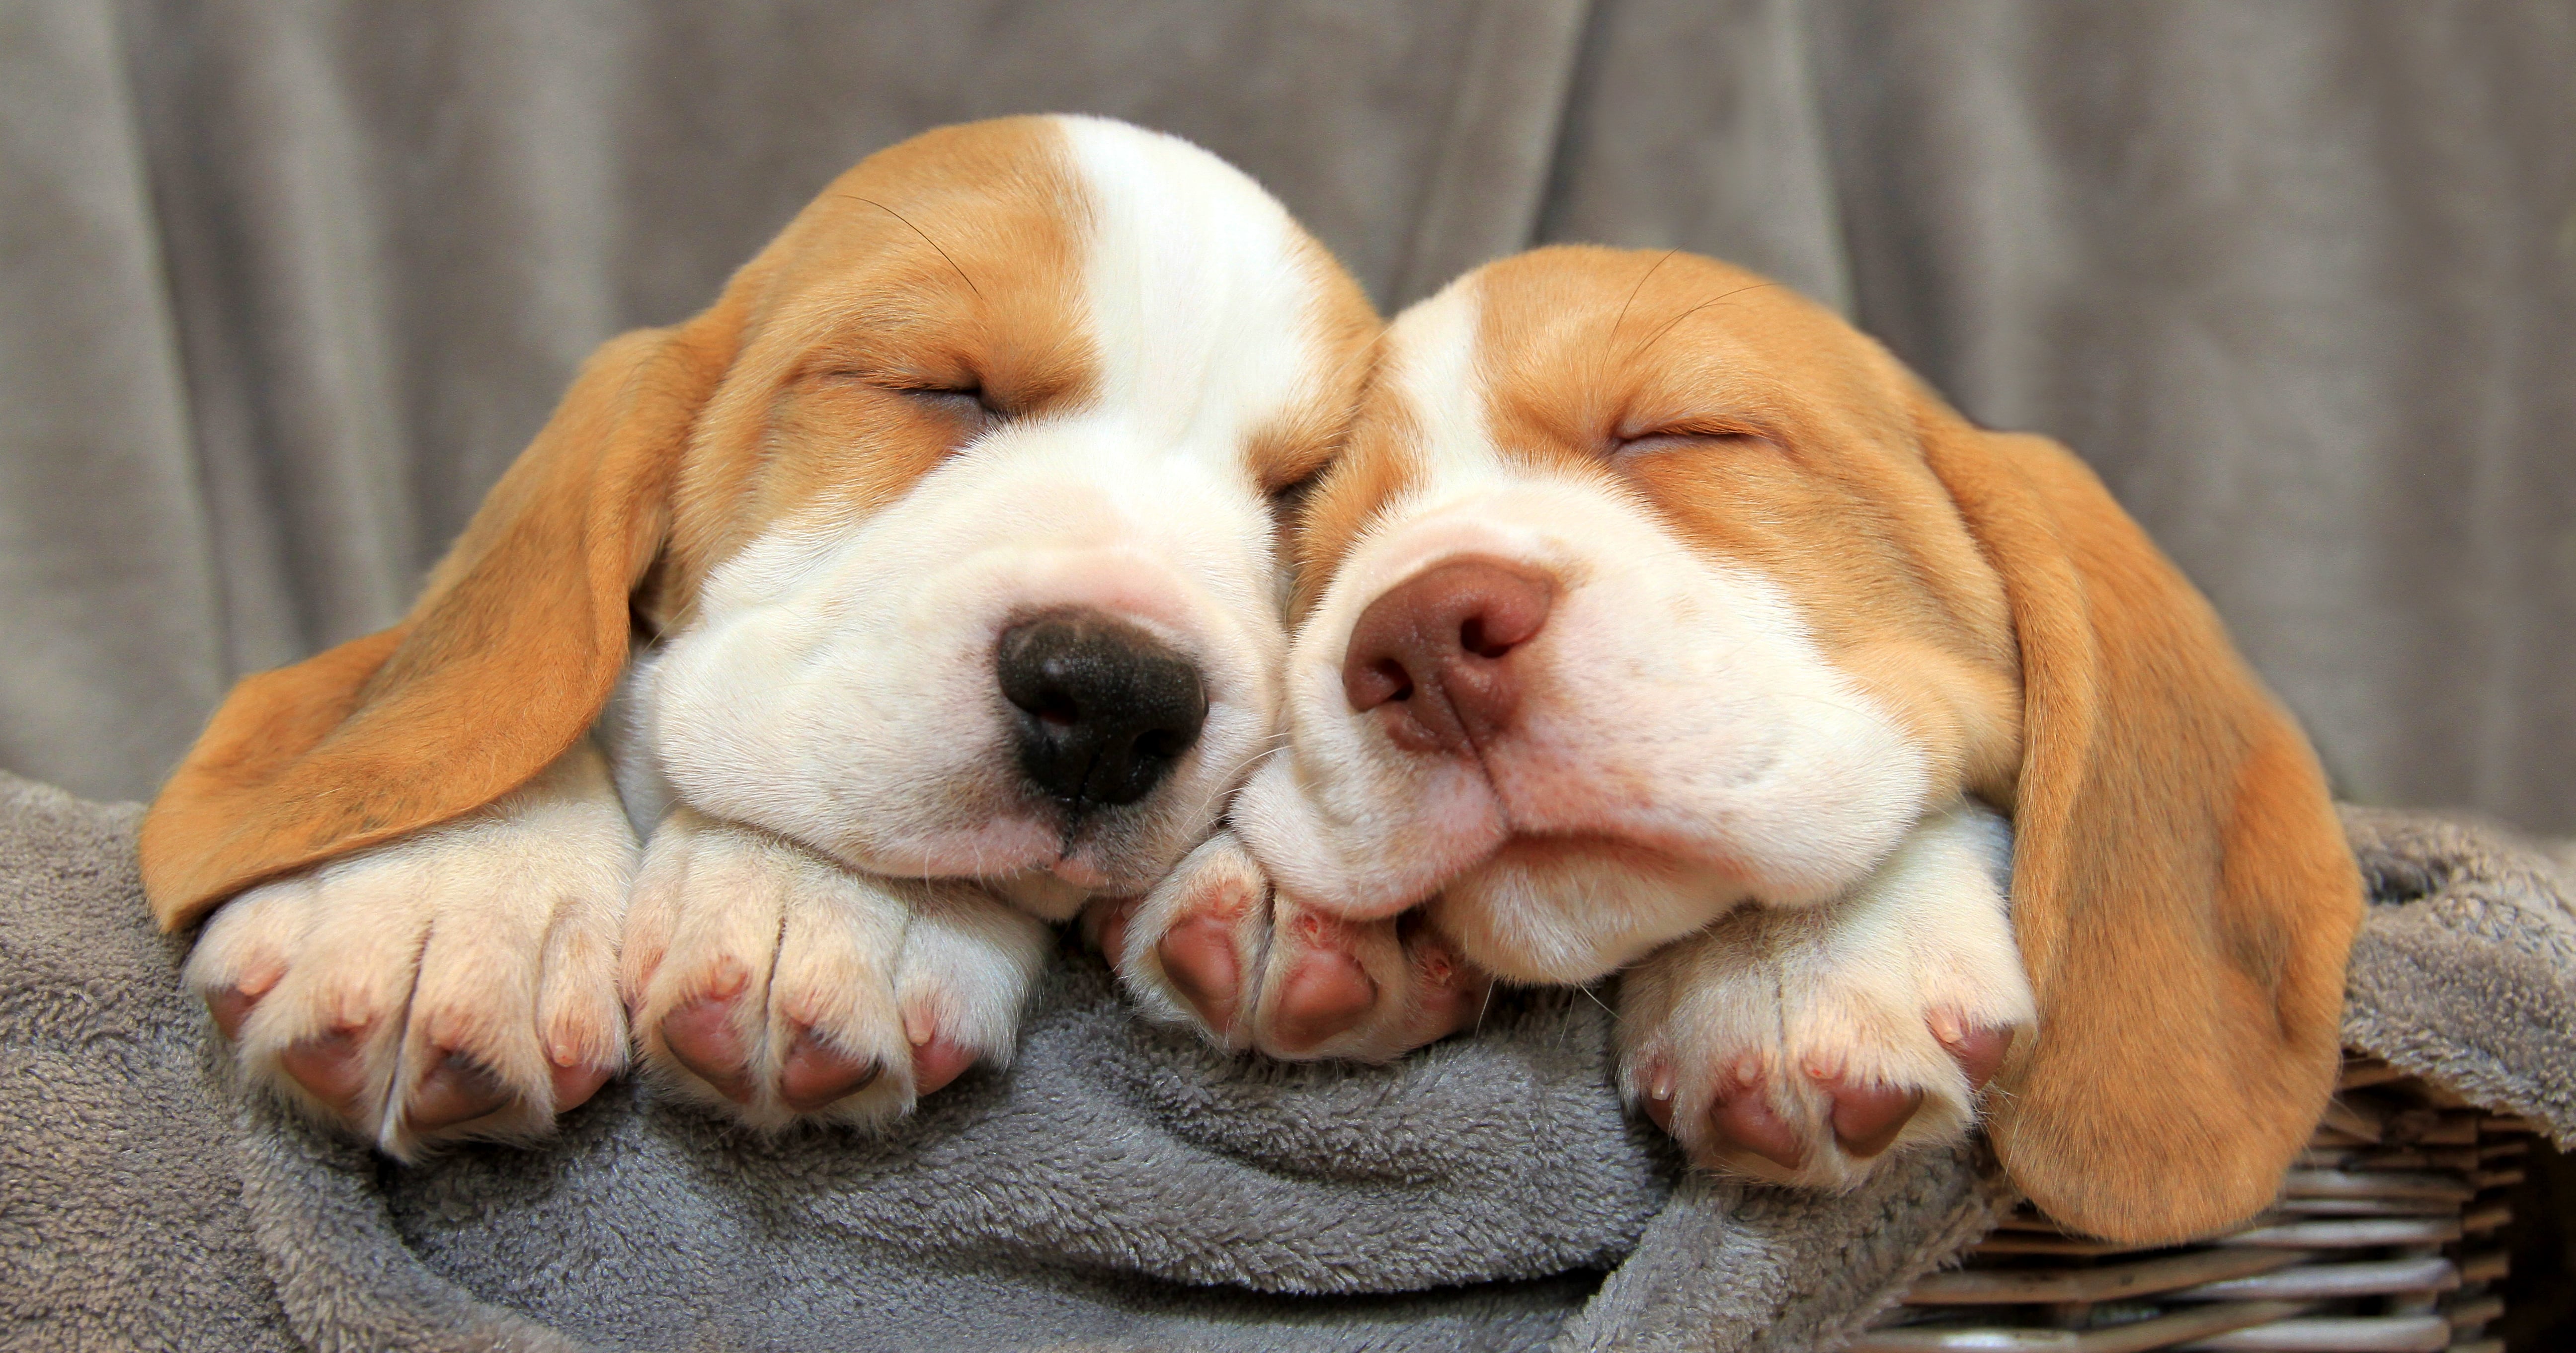 why are beagles cute?